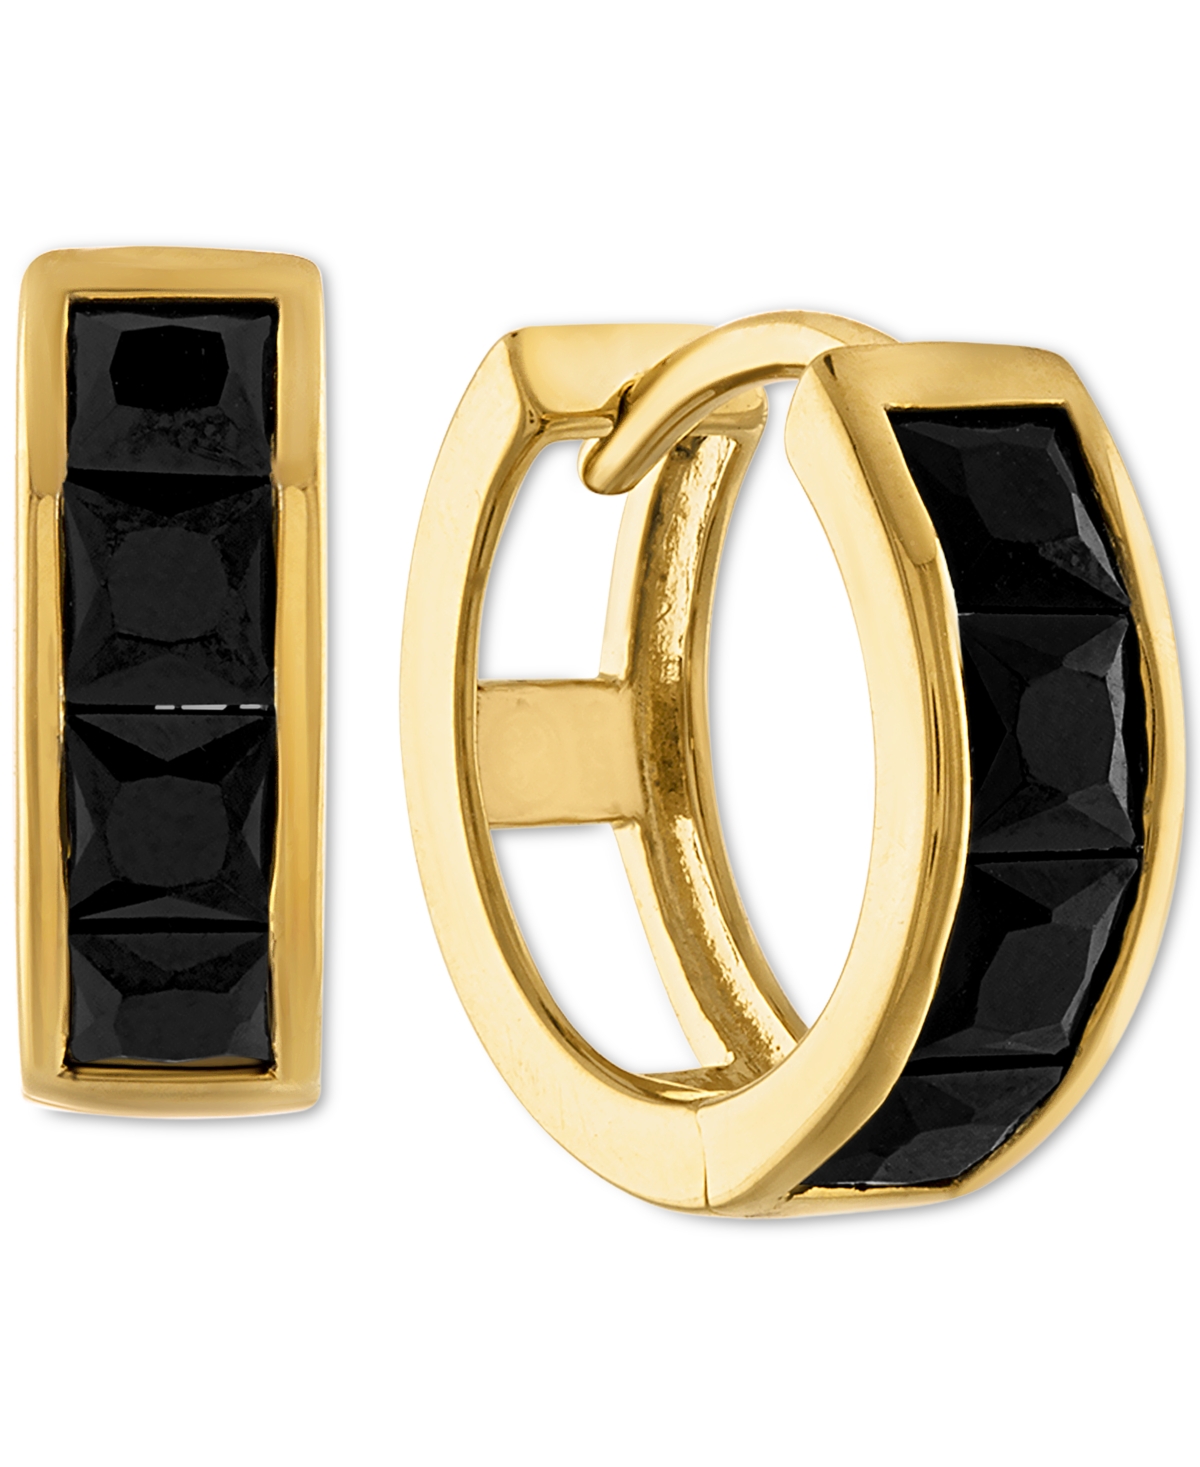 Black Spinel Extra Small Huggie Hoop Earrings in 14k Gold-Plated Sterling Silver, Created for Macy's - Black